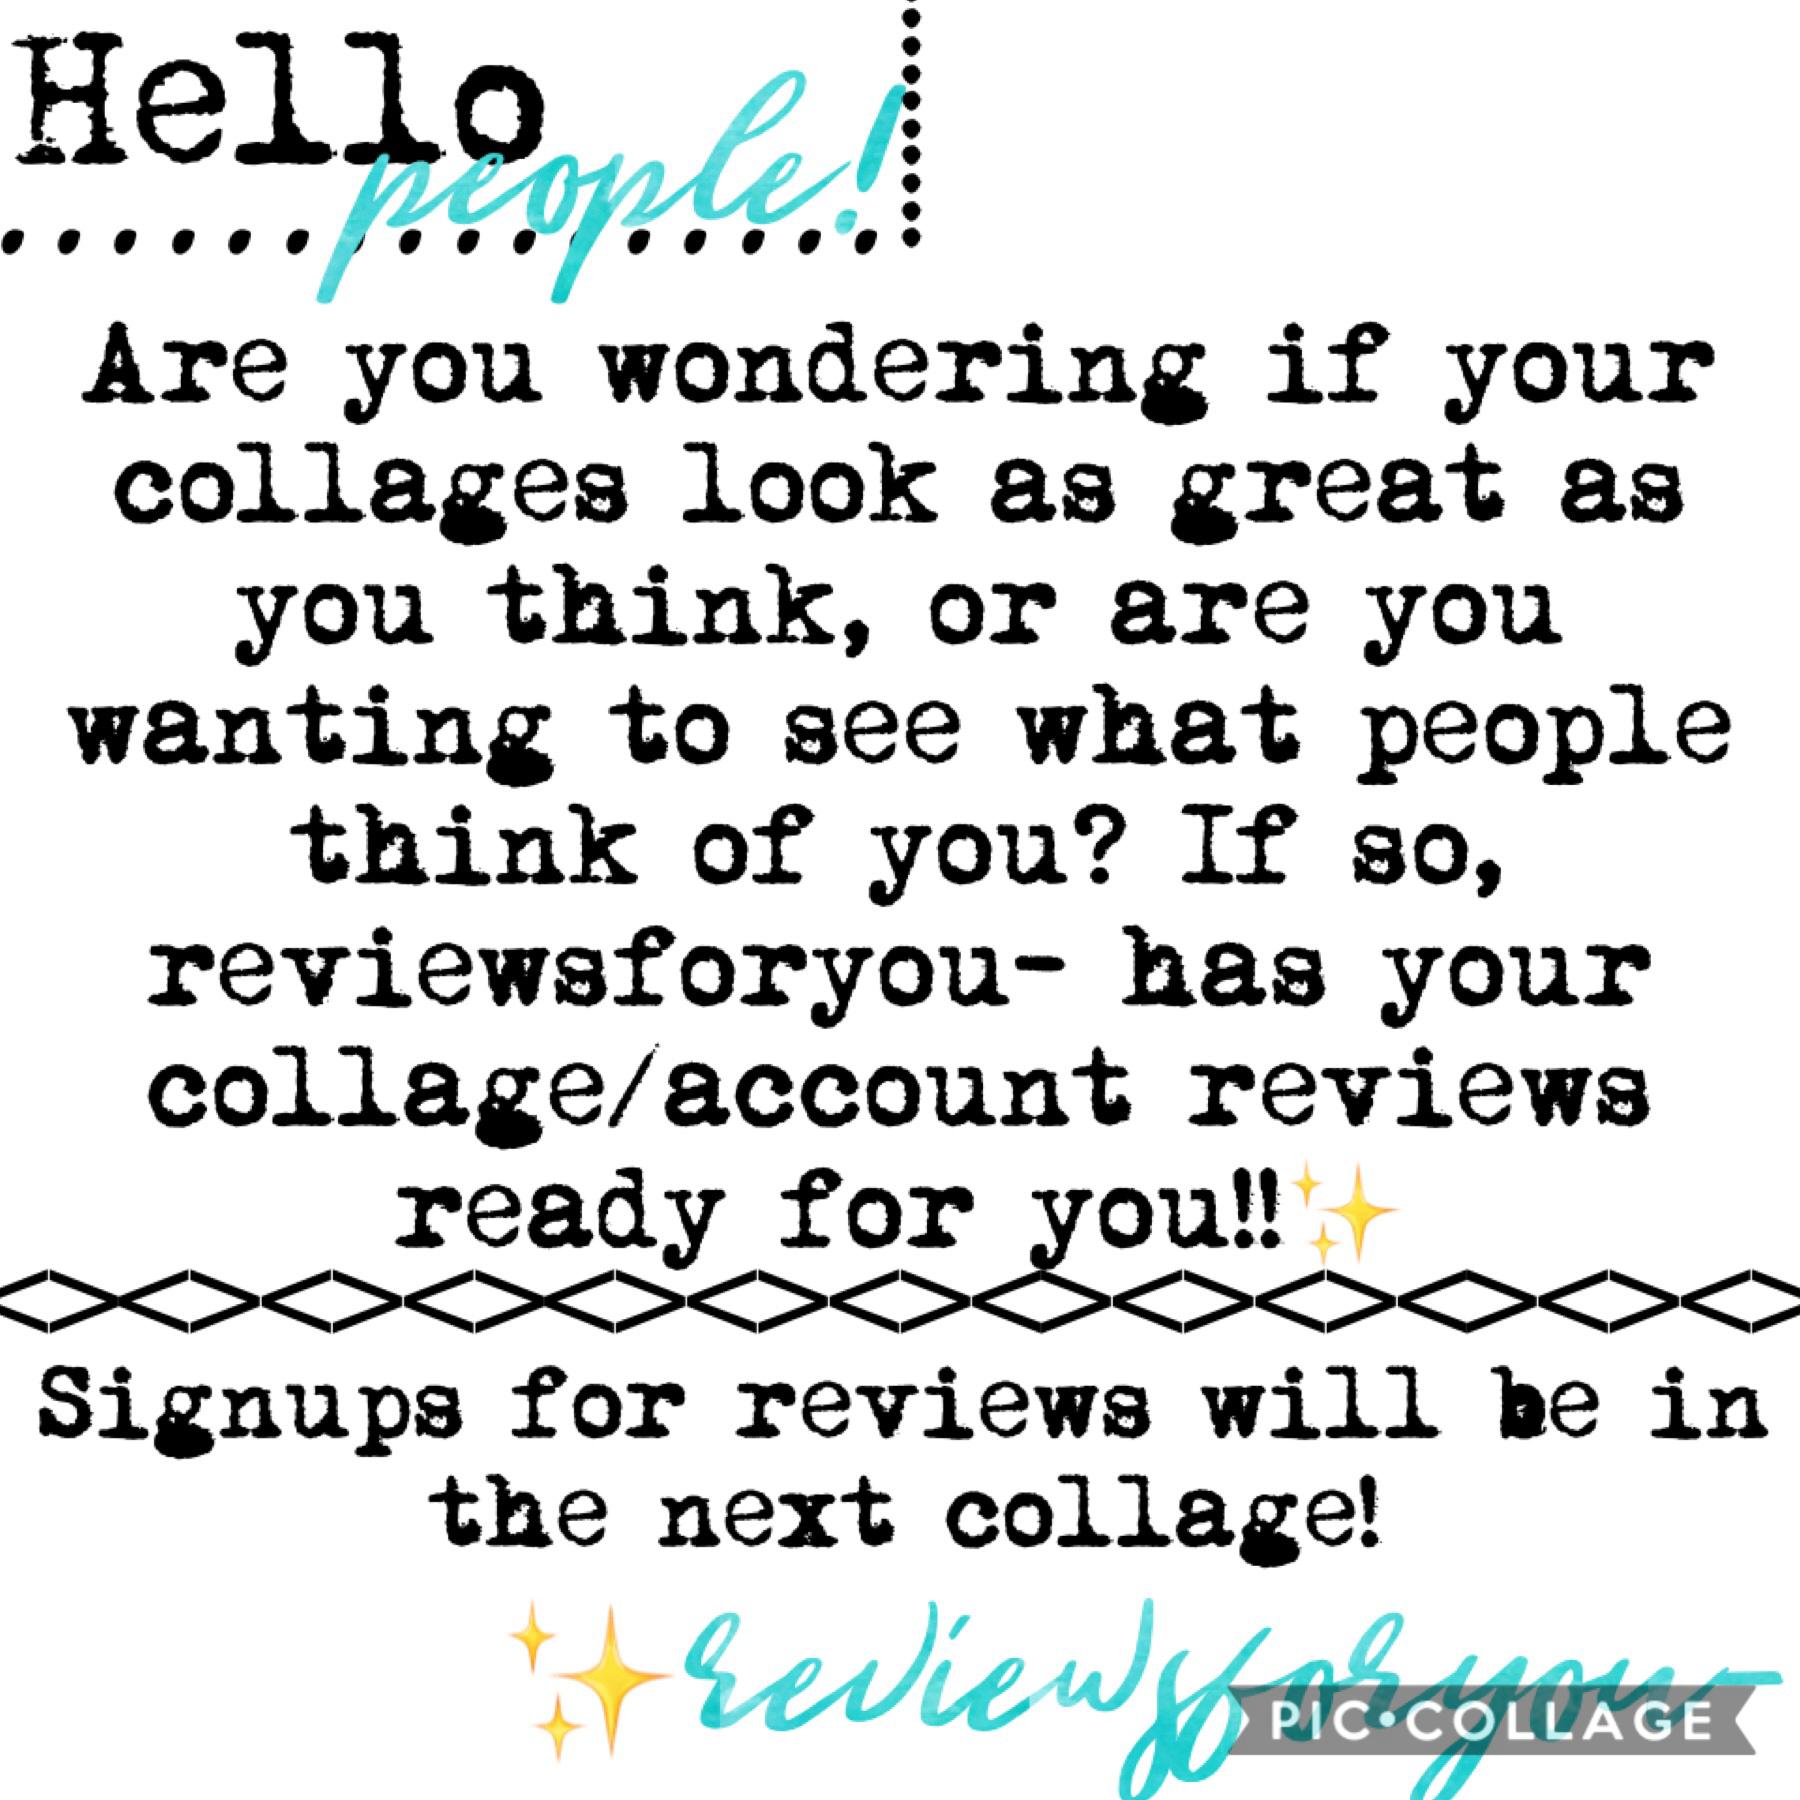 Signups for reviews will be in the next collage!✨

<——————————————————————————